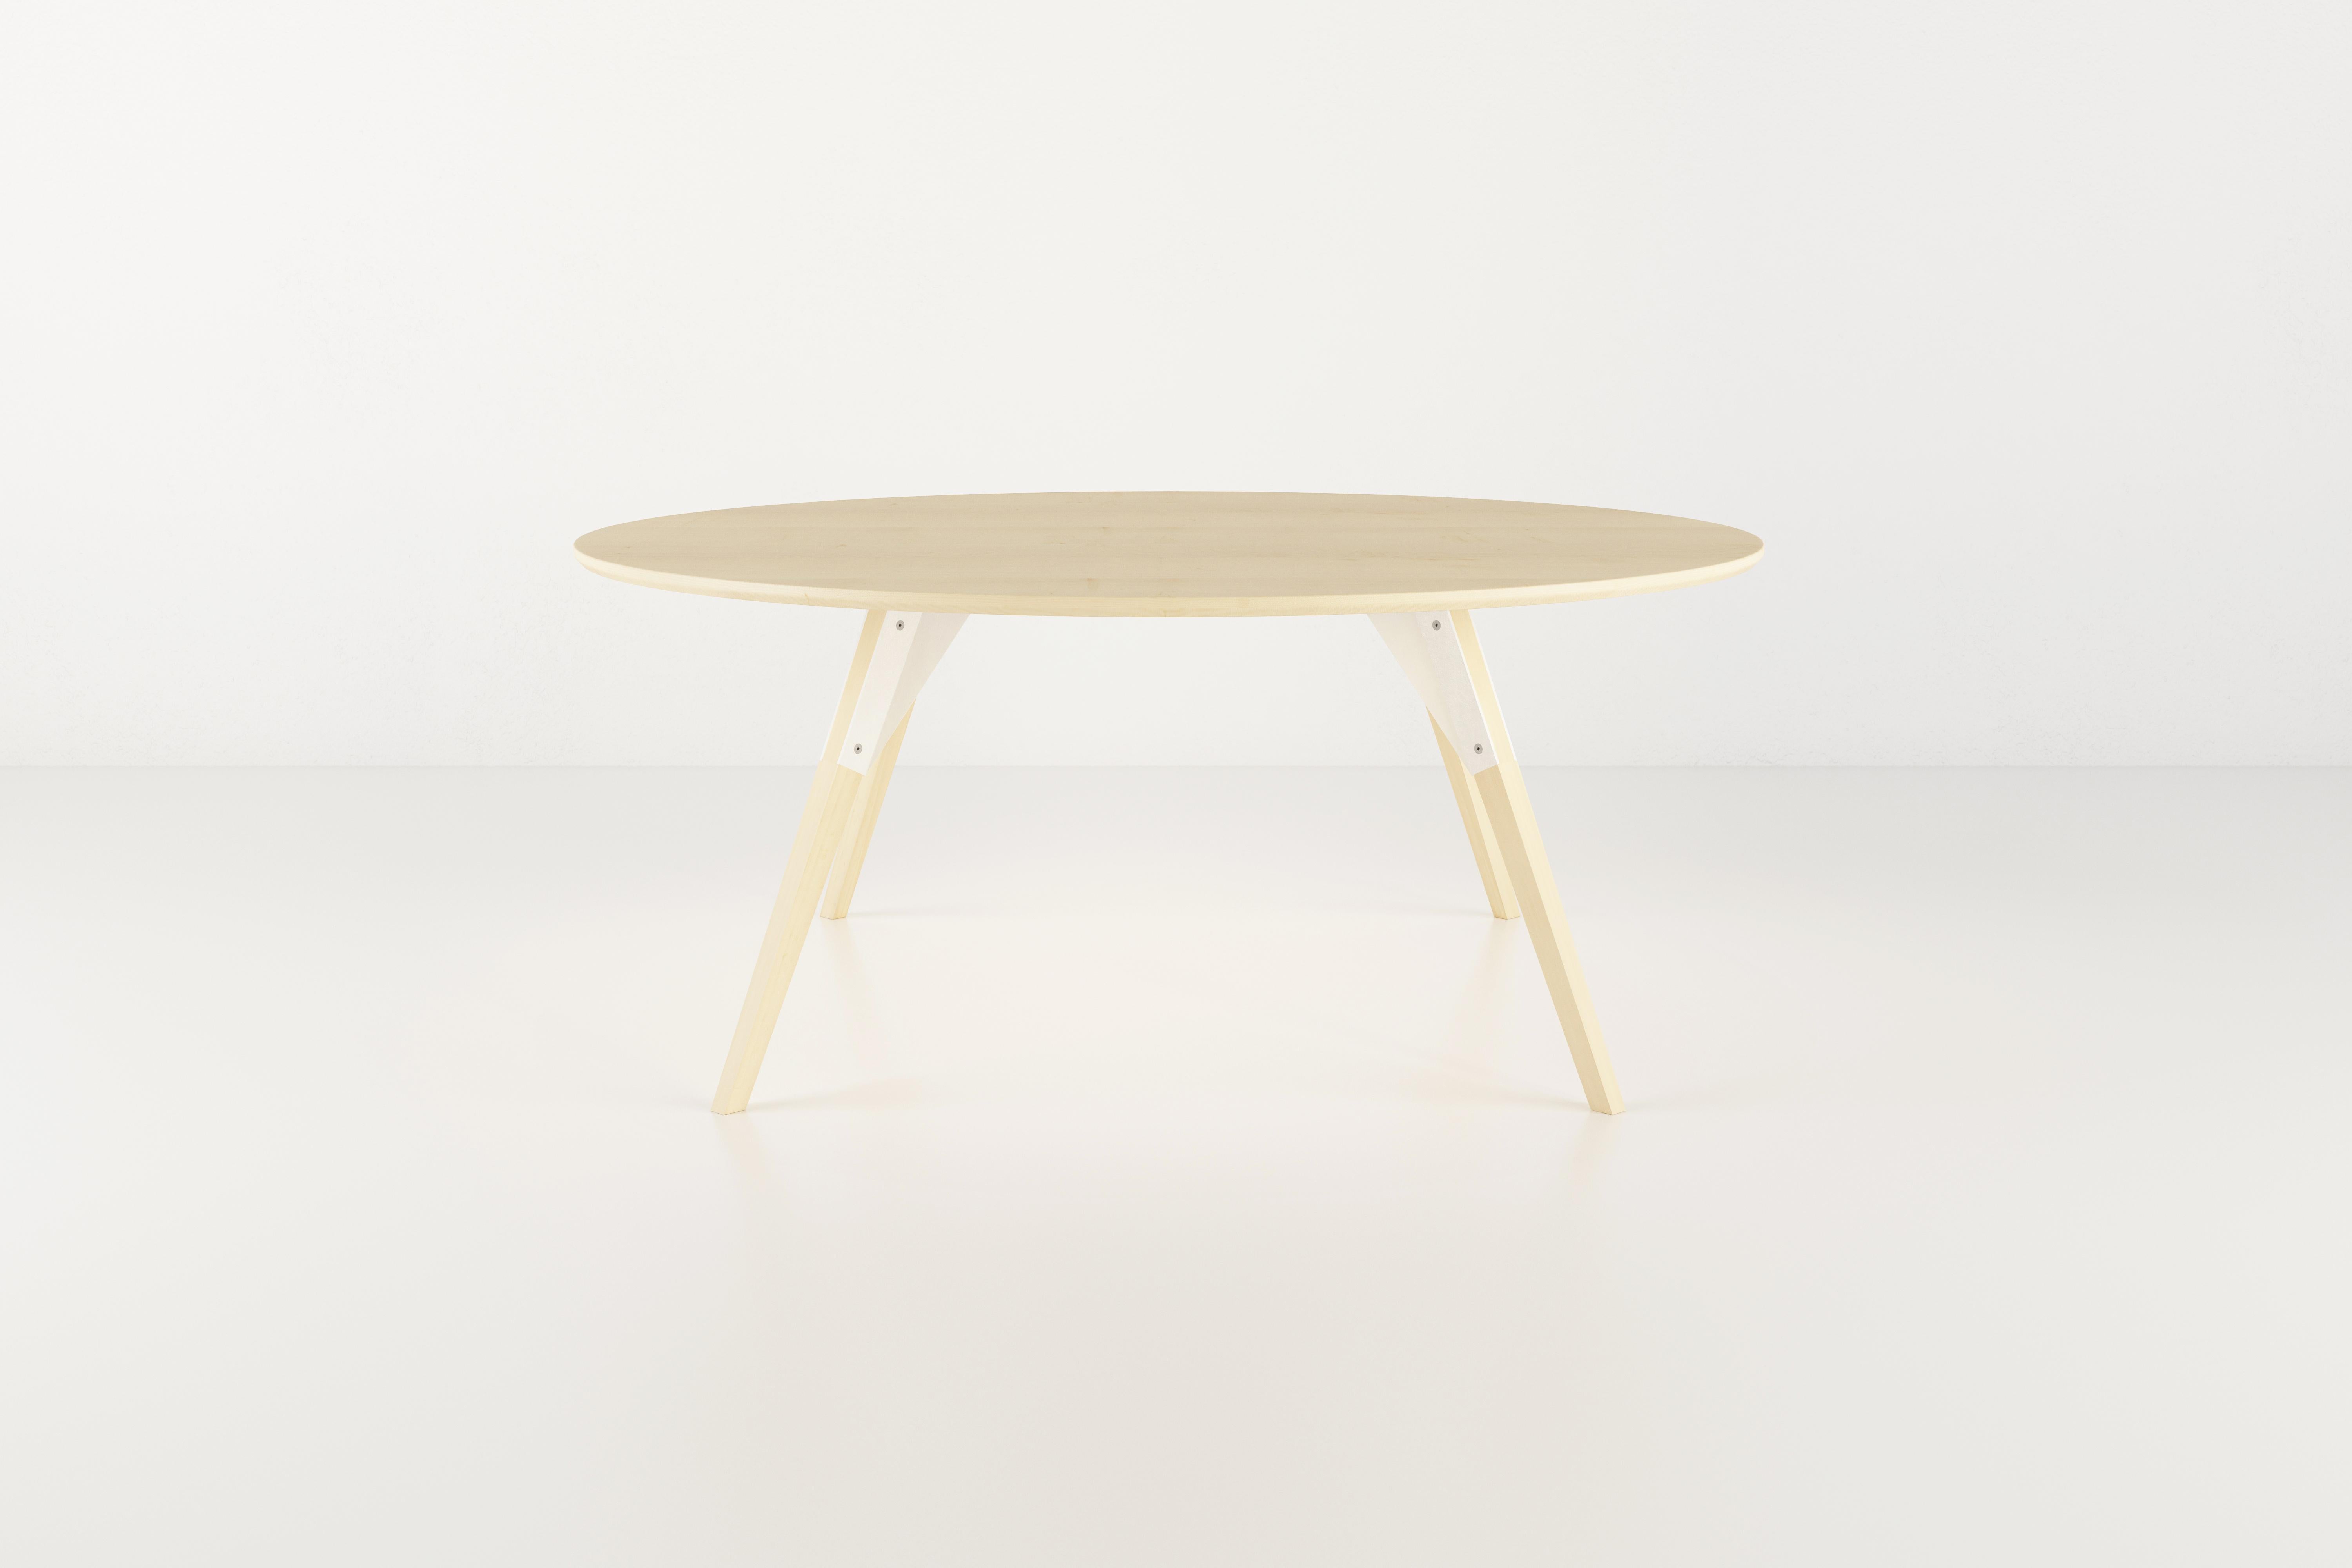 Minimalist Clarke Industrial Coffee Table Round Maple White For Sale